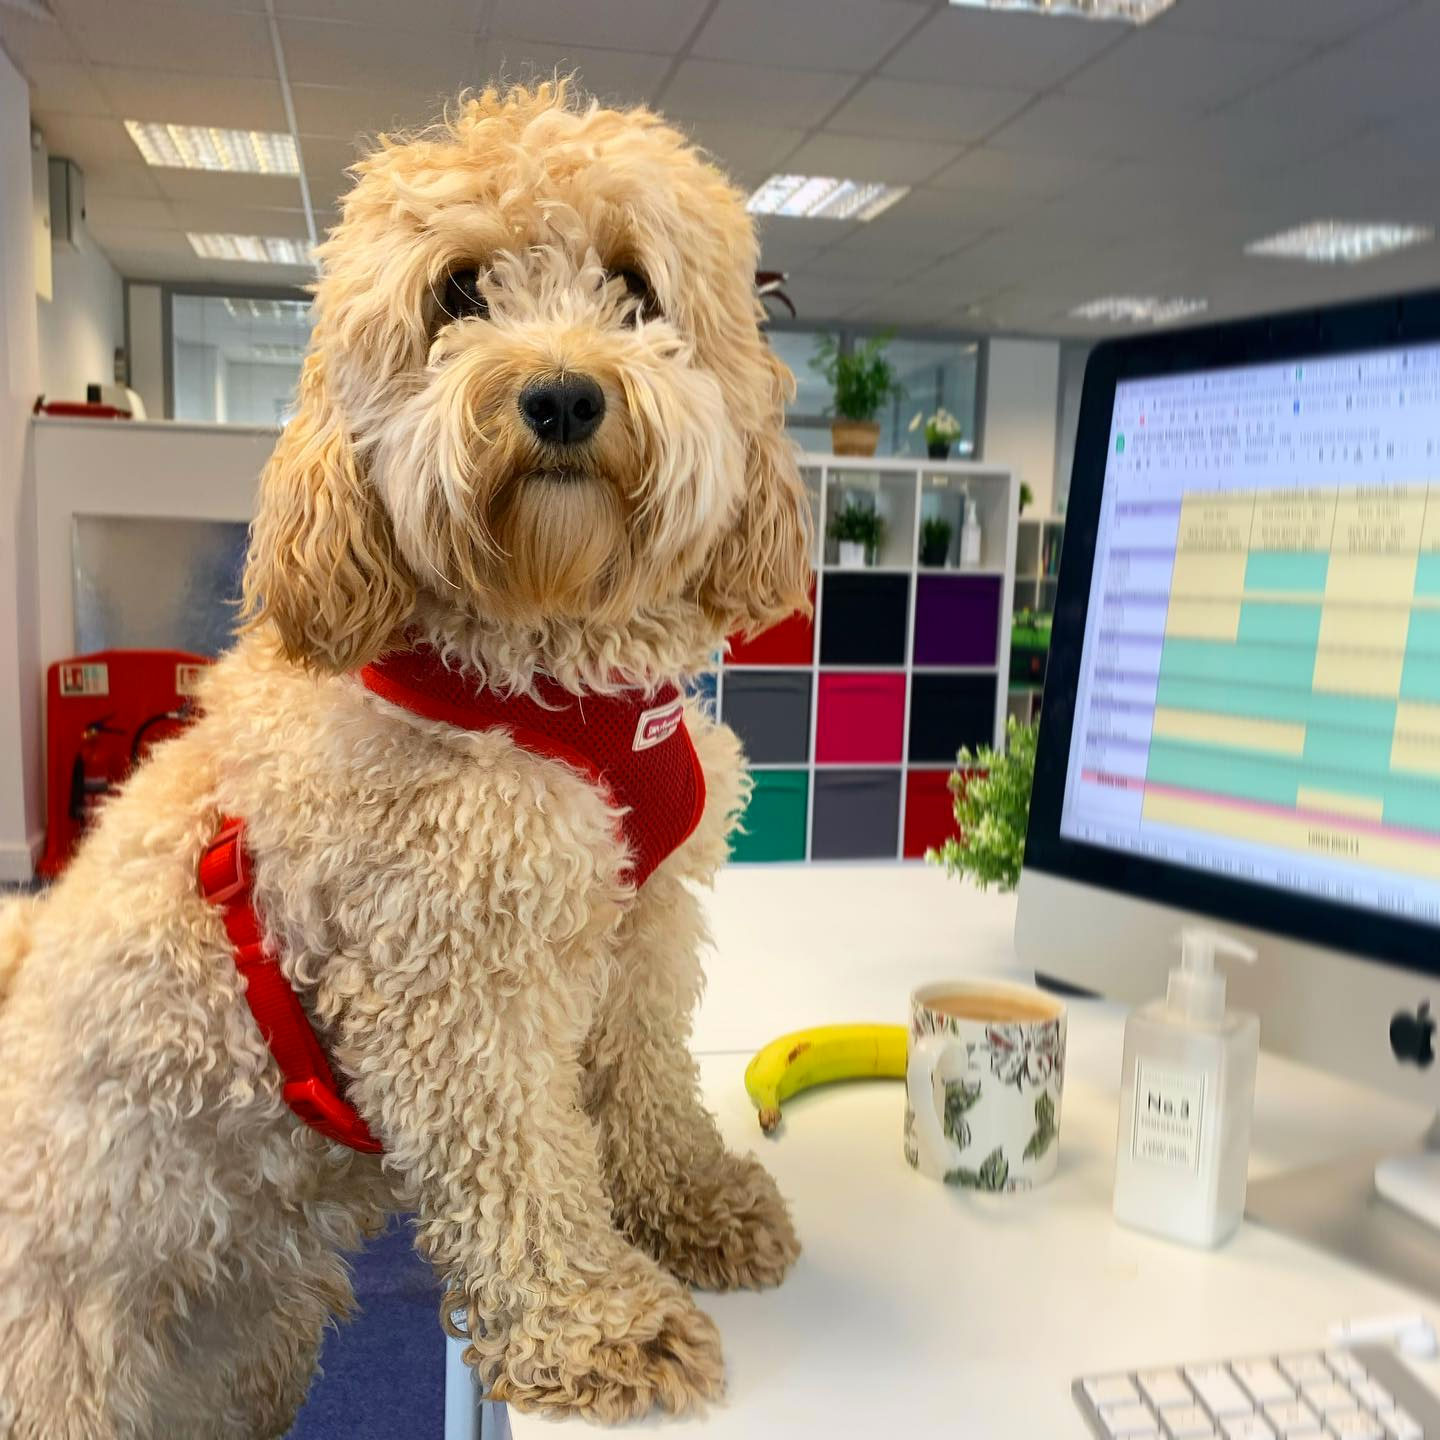 Walter the Cockapoo at his desk. Wearing a red harness in front of a social media plan